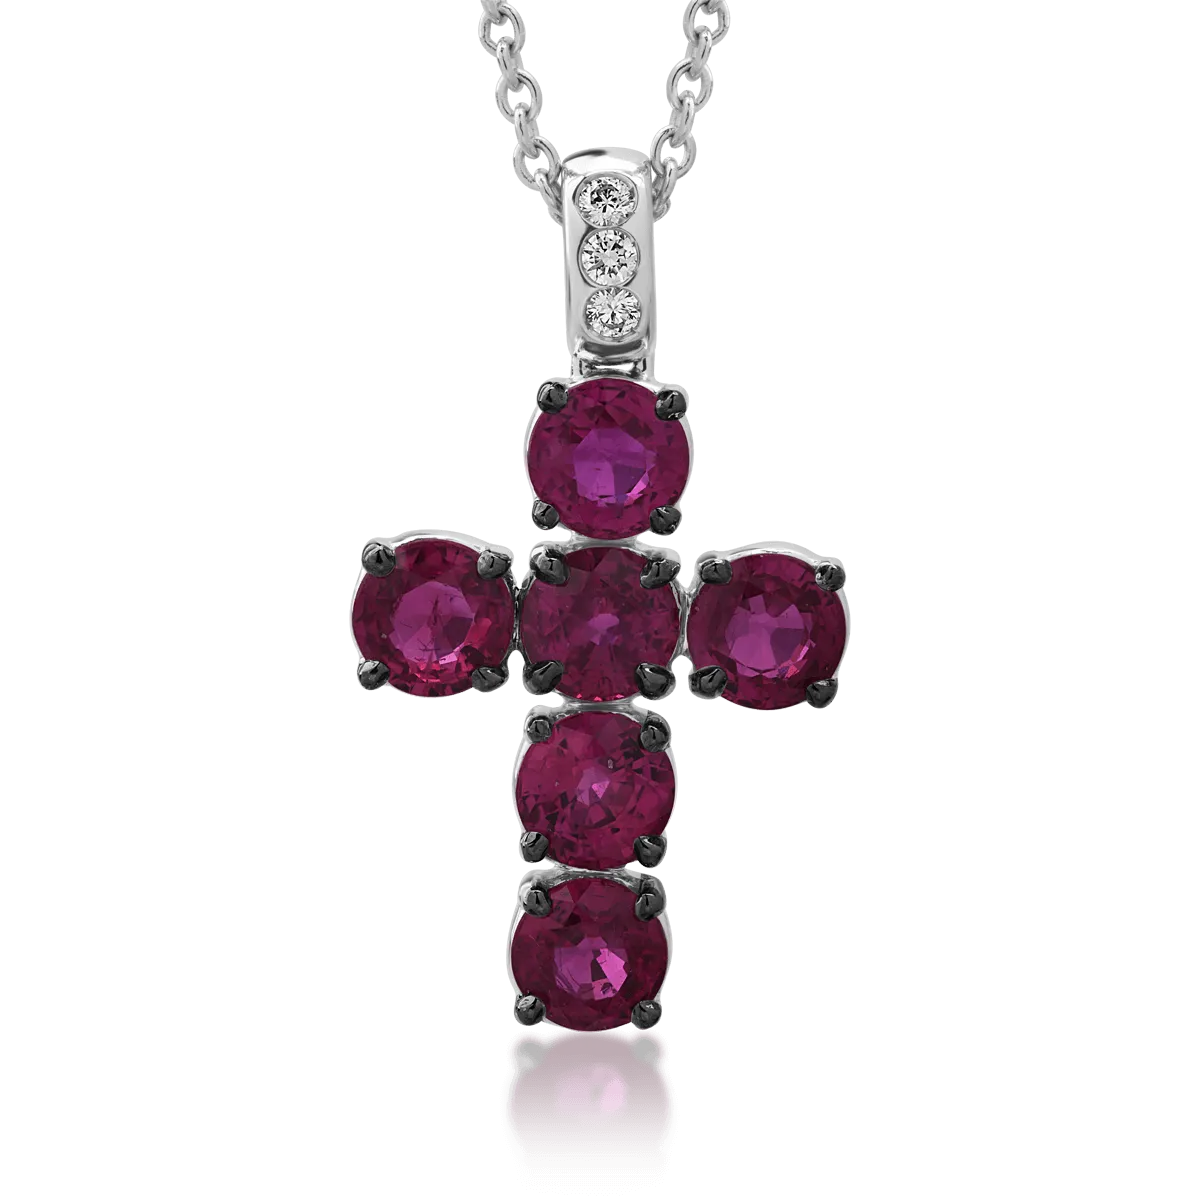 18K white gold chain with pendant with rubies of 3.27ct and diamonds of 0.06ct